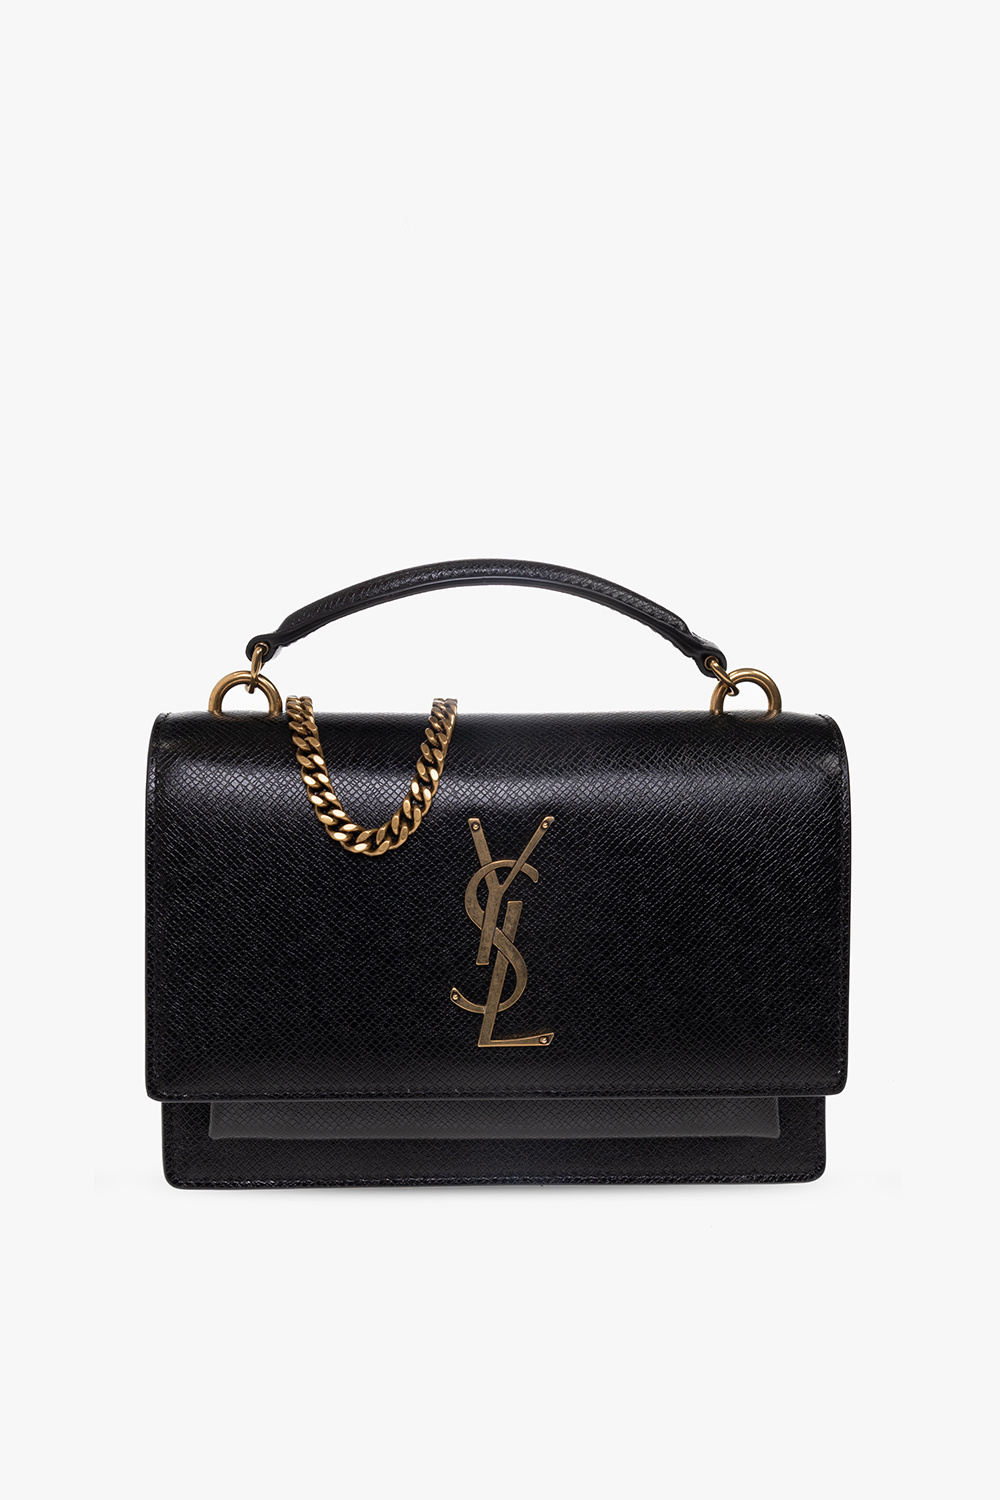 My latest find, preloved YSL Sunset (the older model without chain